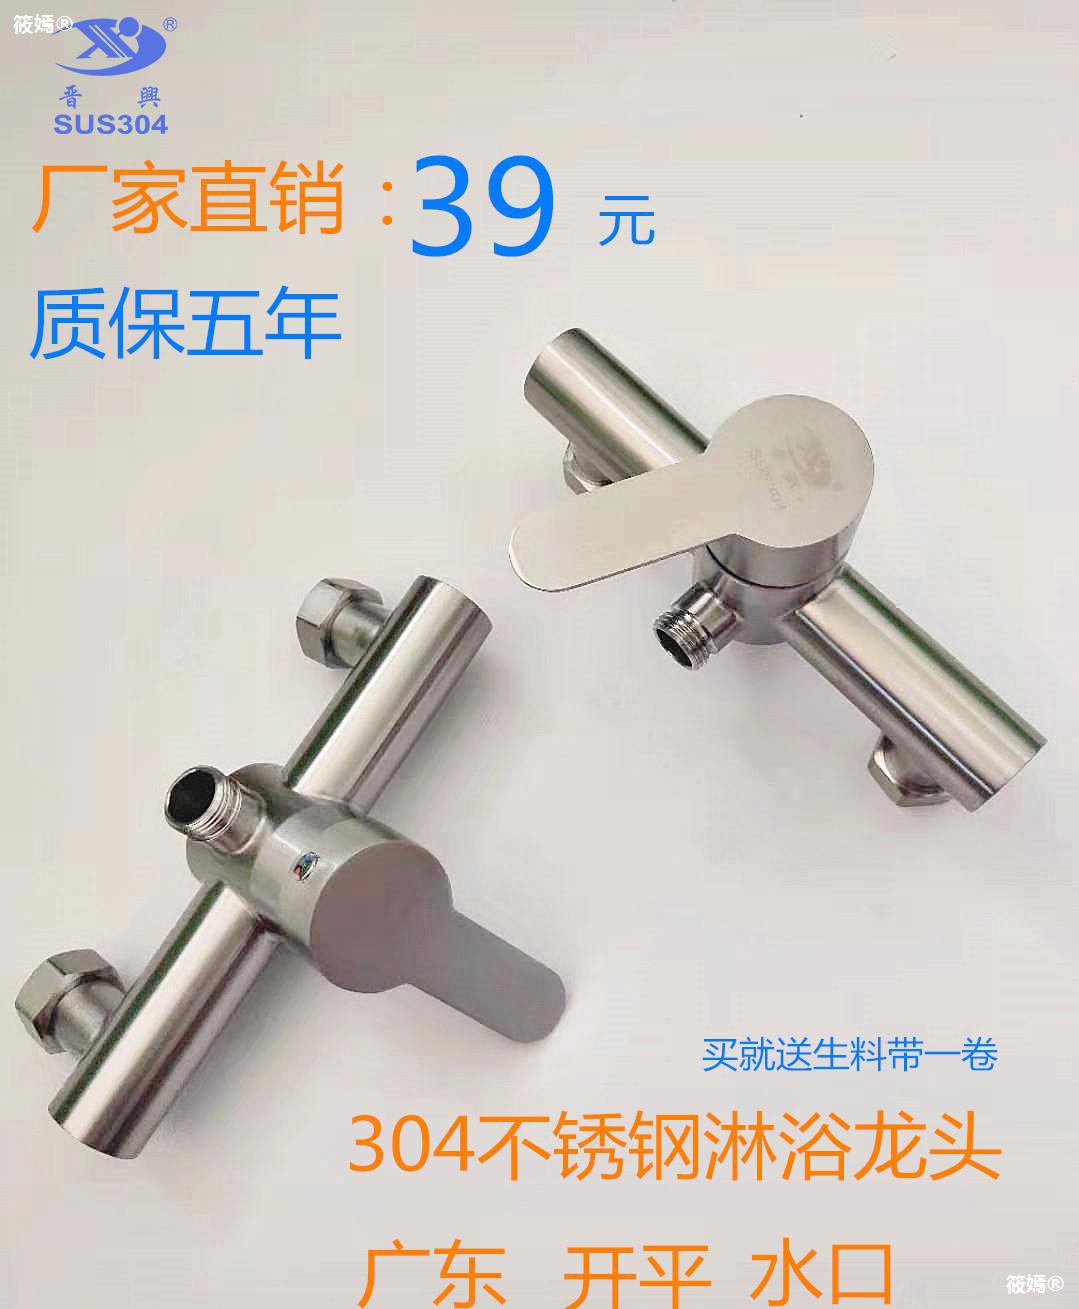 304 stainless steel Shower Faucet Flower sprinkling suit Hot and cold Water mixing valve bathtub Ming Zhuang Dark outfit Shower Room Bath Nozzle